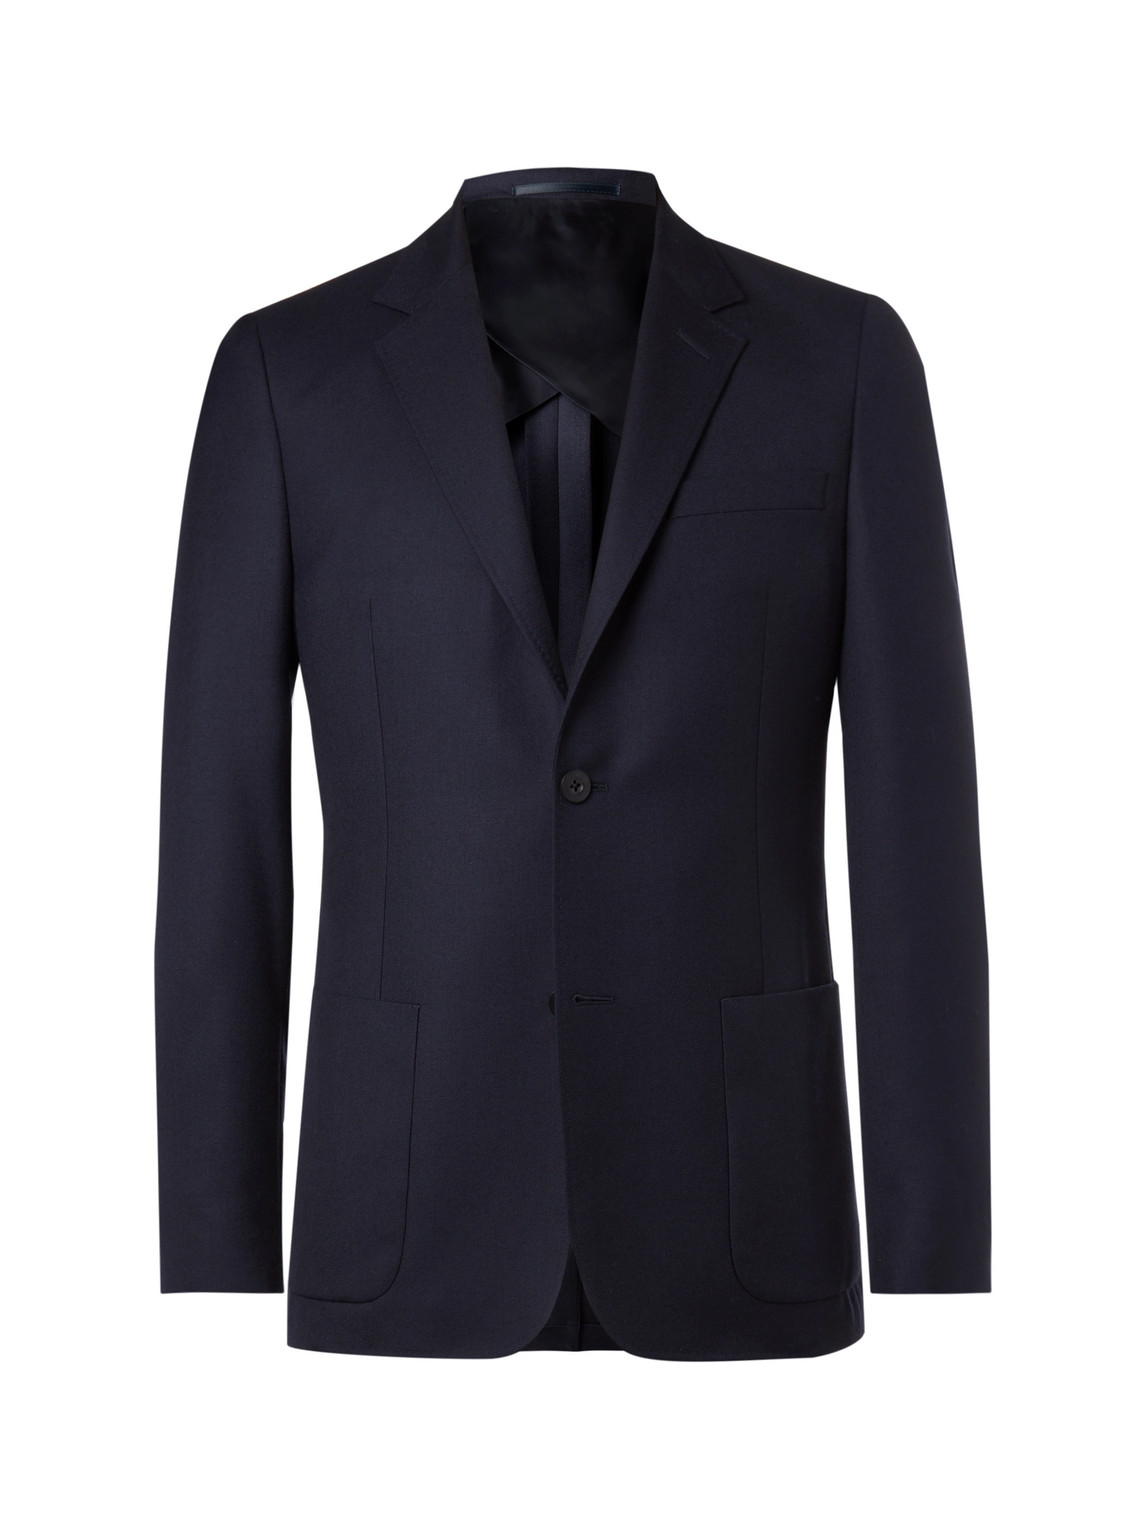 Navy Unstructured Worsted Wool Suit Jacket